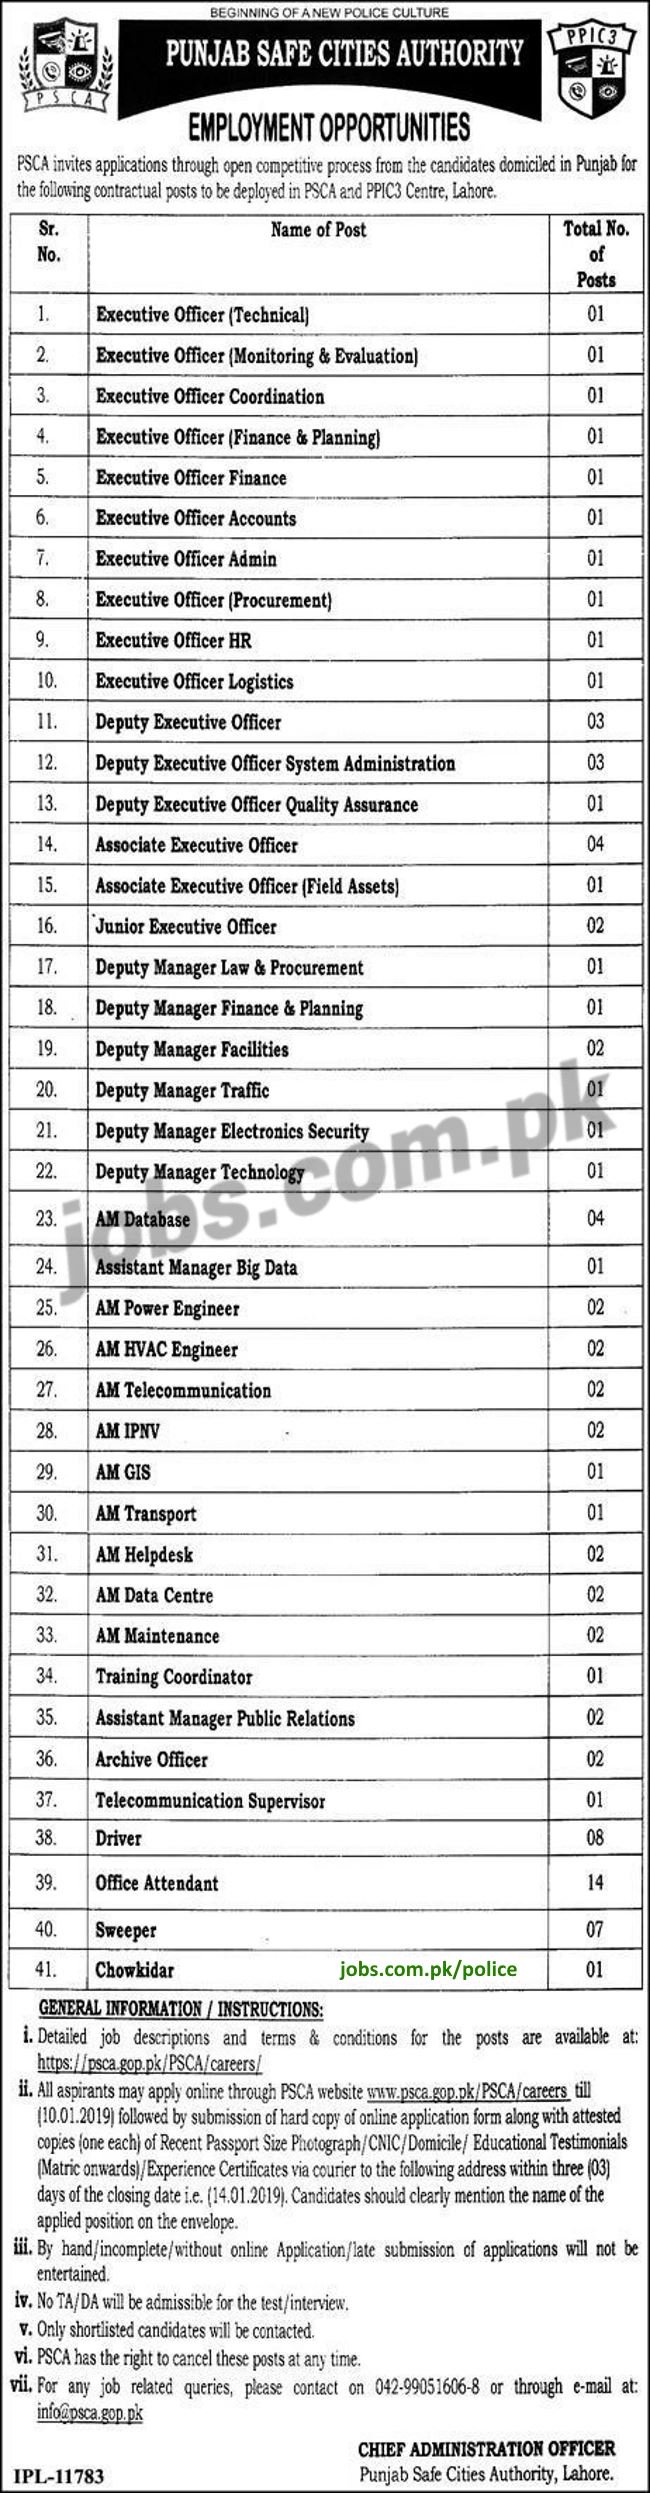 Punjab Safe Cities Authority (PSCA) Jobs 2019 for 88+ Executive Officers, IT, HR, Accounts, Telecom, Admin, Legal & Other Posts